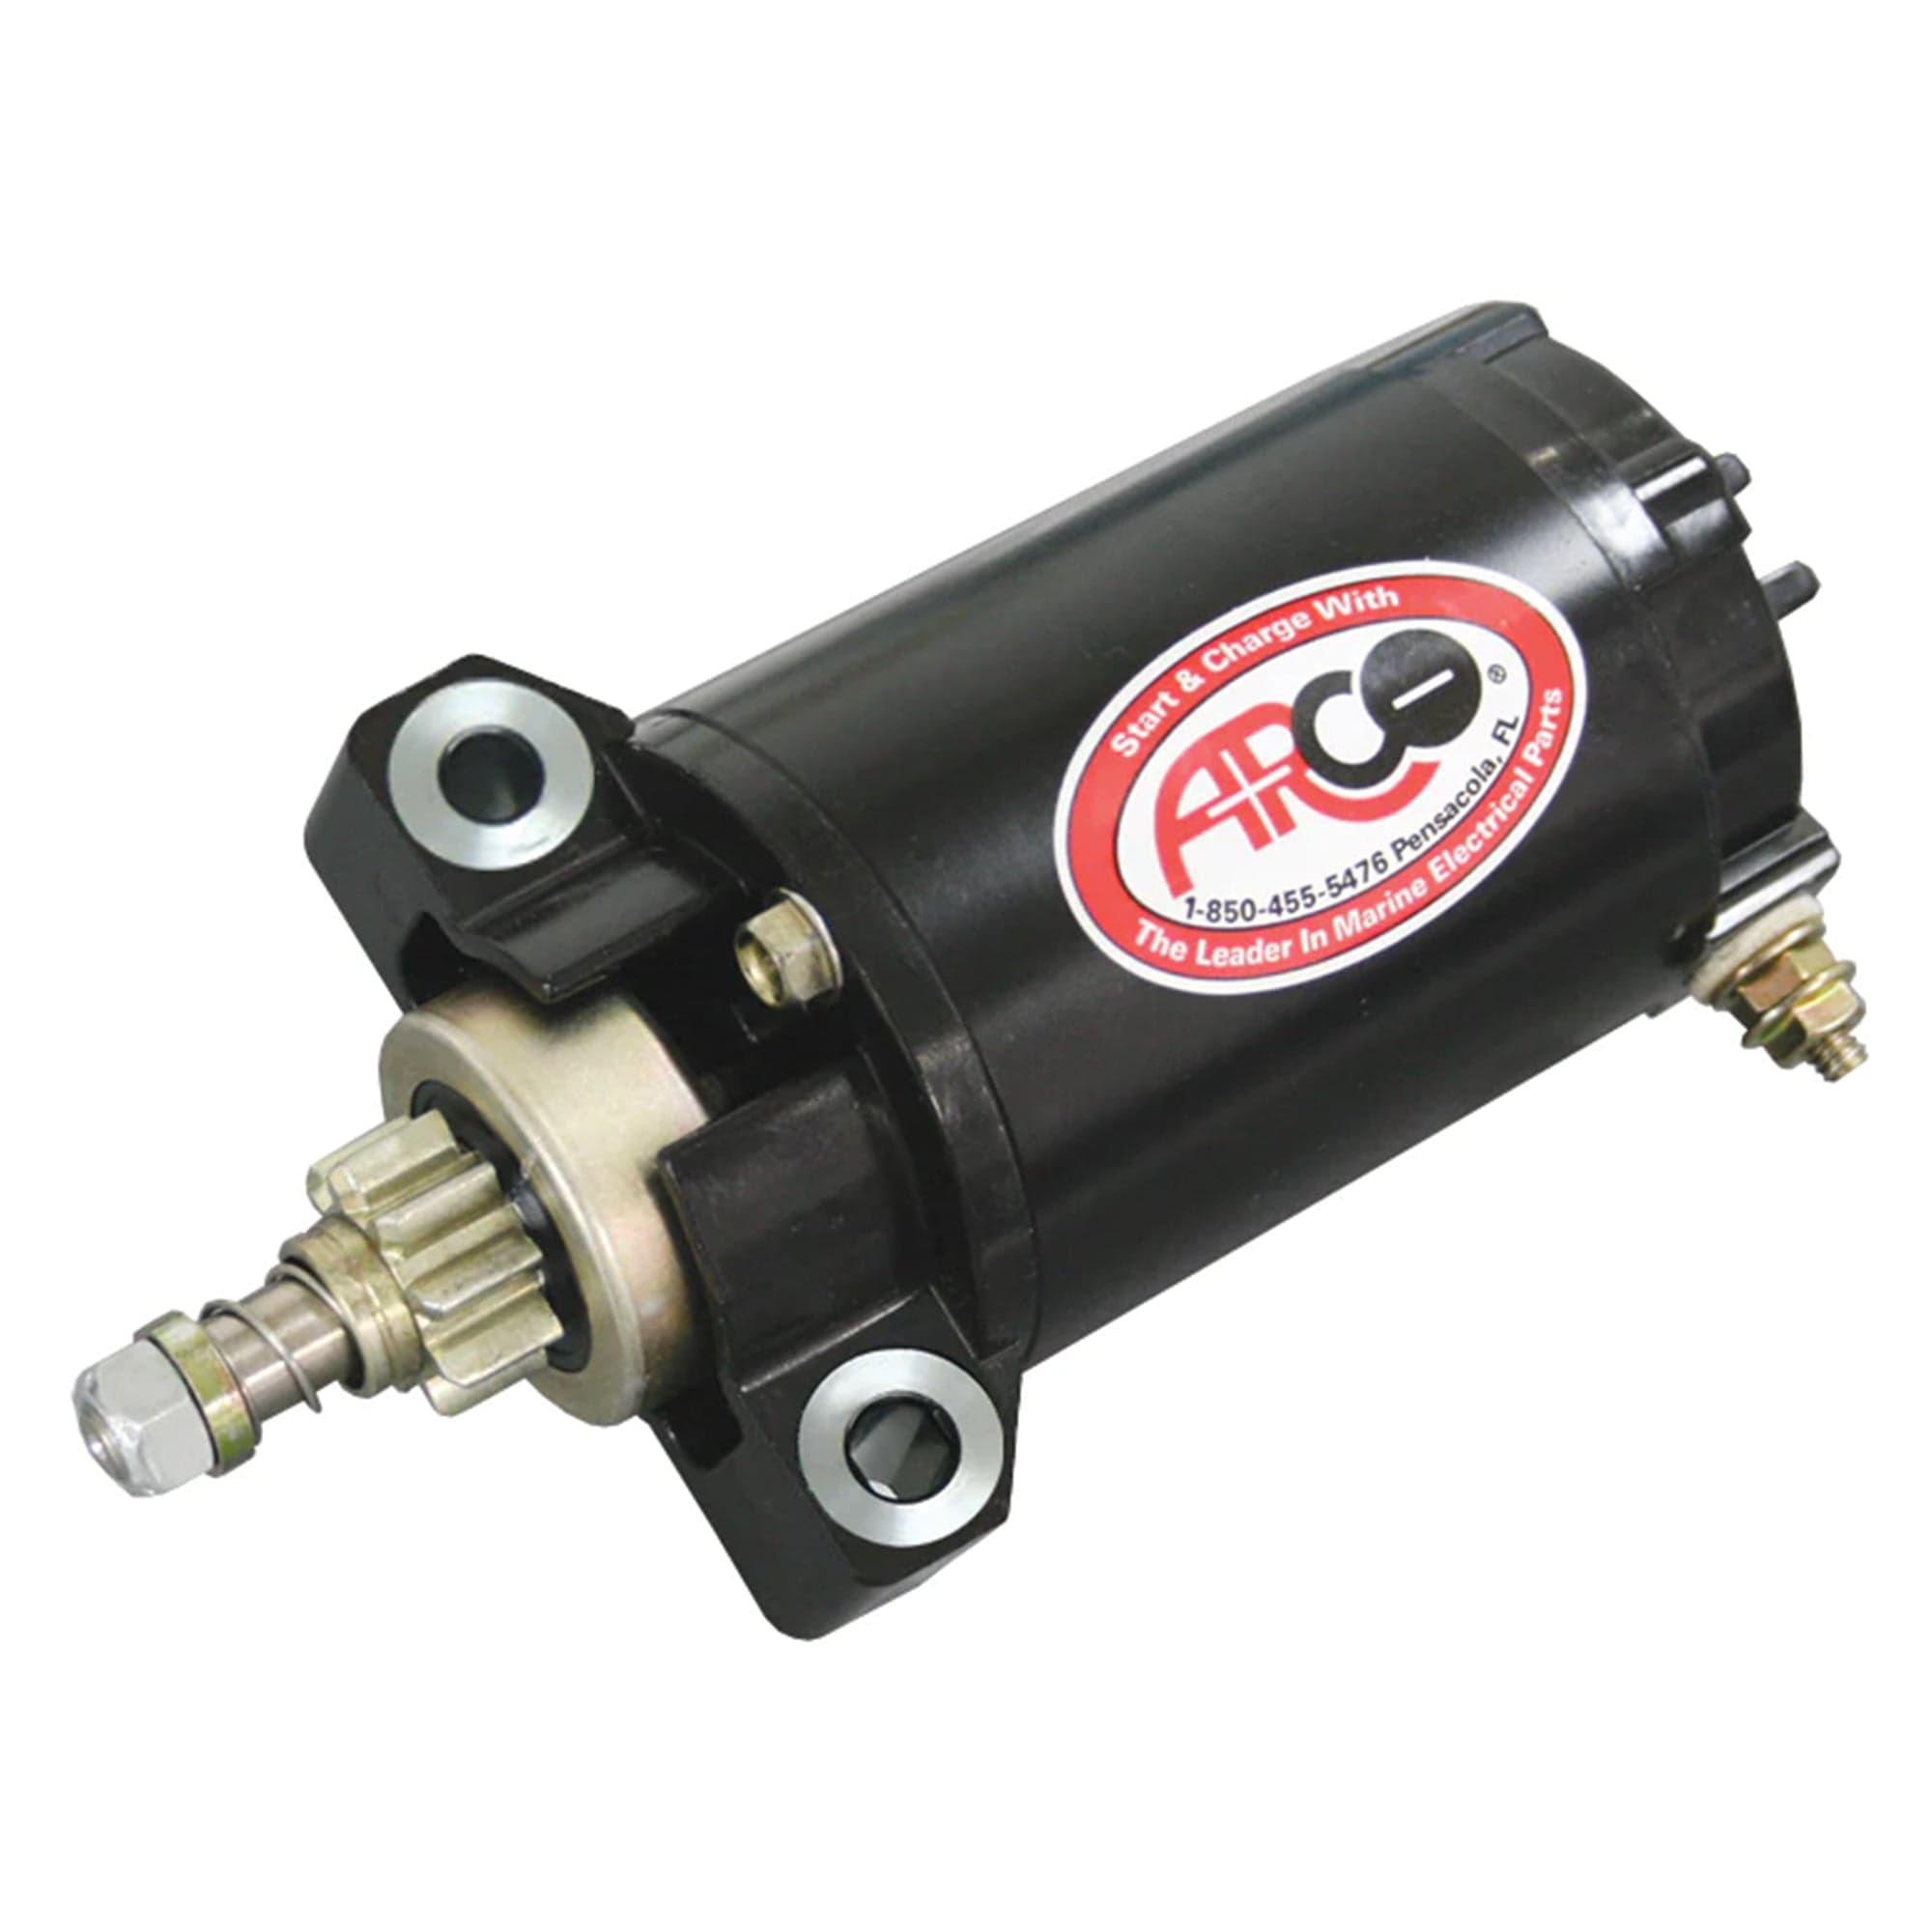 ARCO NEW Original Equipment Quality Replacement Outboard Starter for Mercury and Yamaha - 66M-81800, 50-85257, 50-857065, 859168, 893894